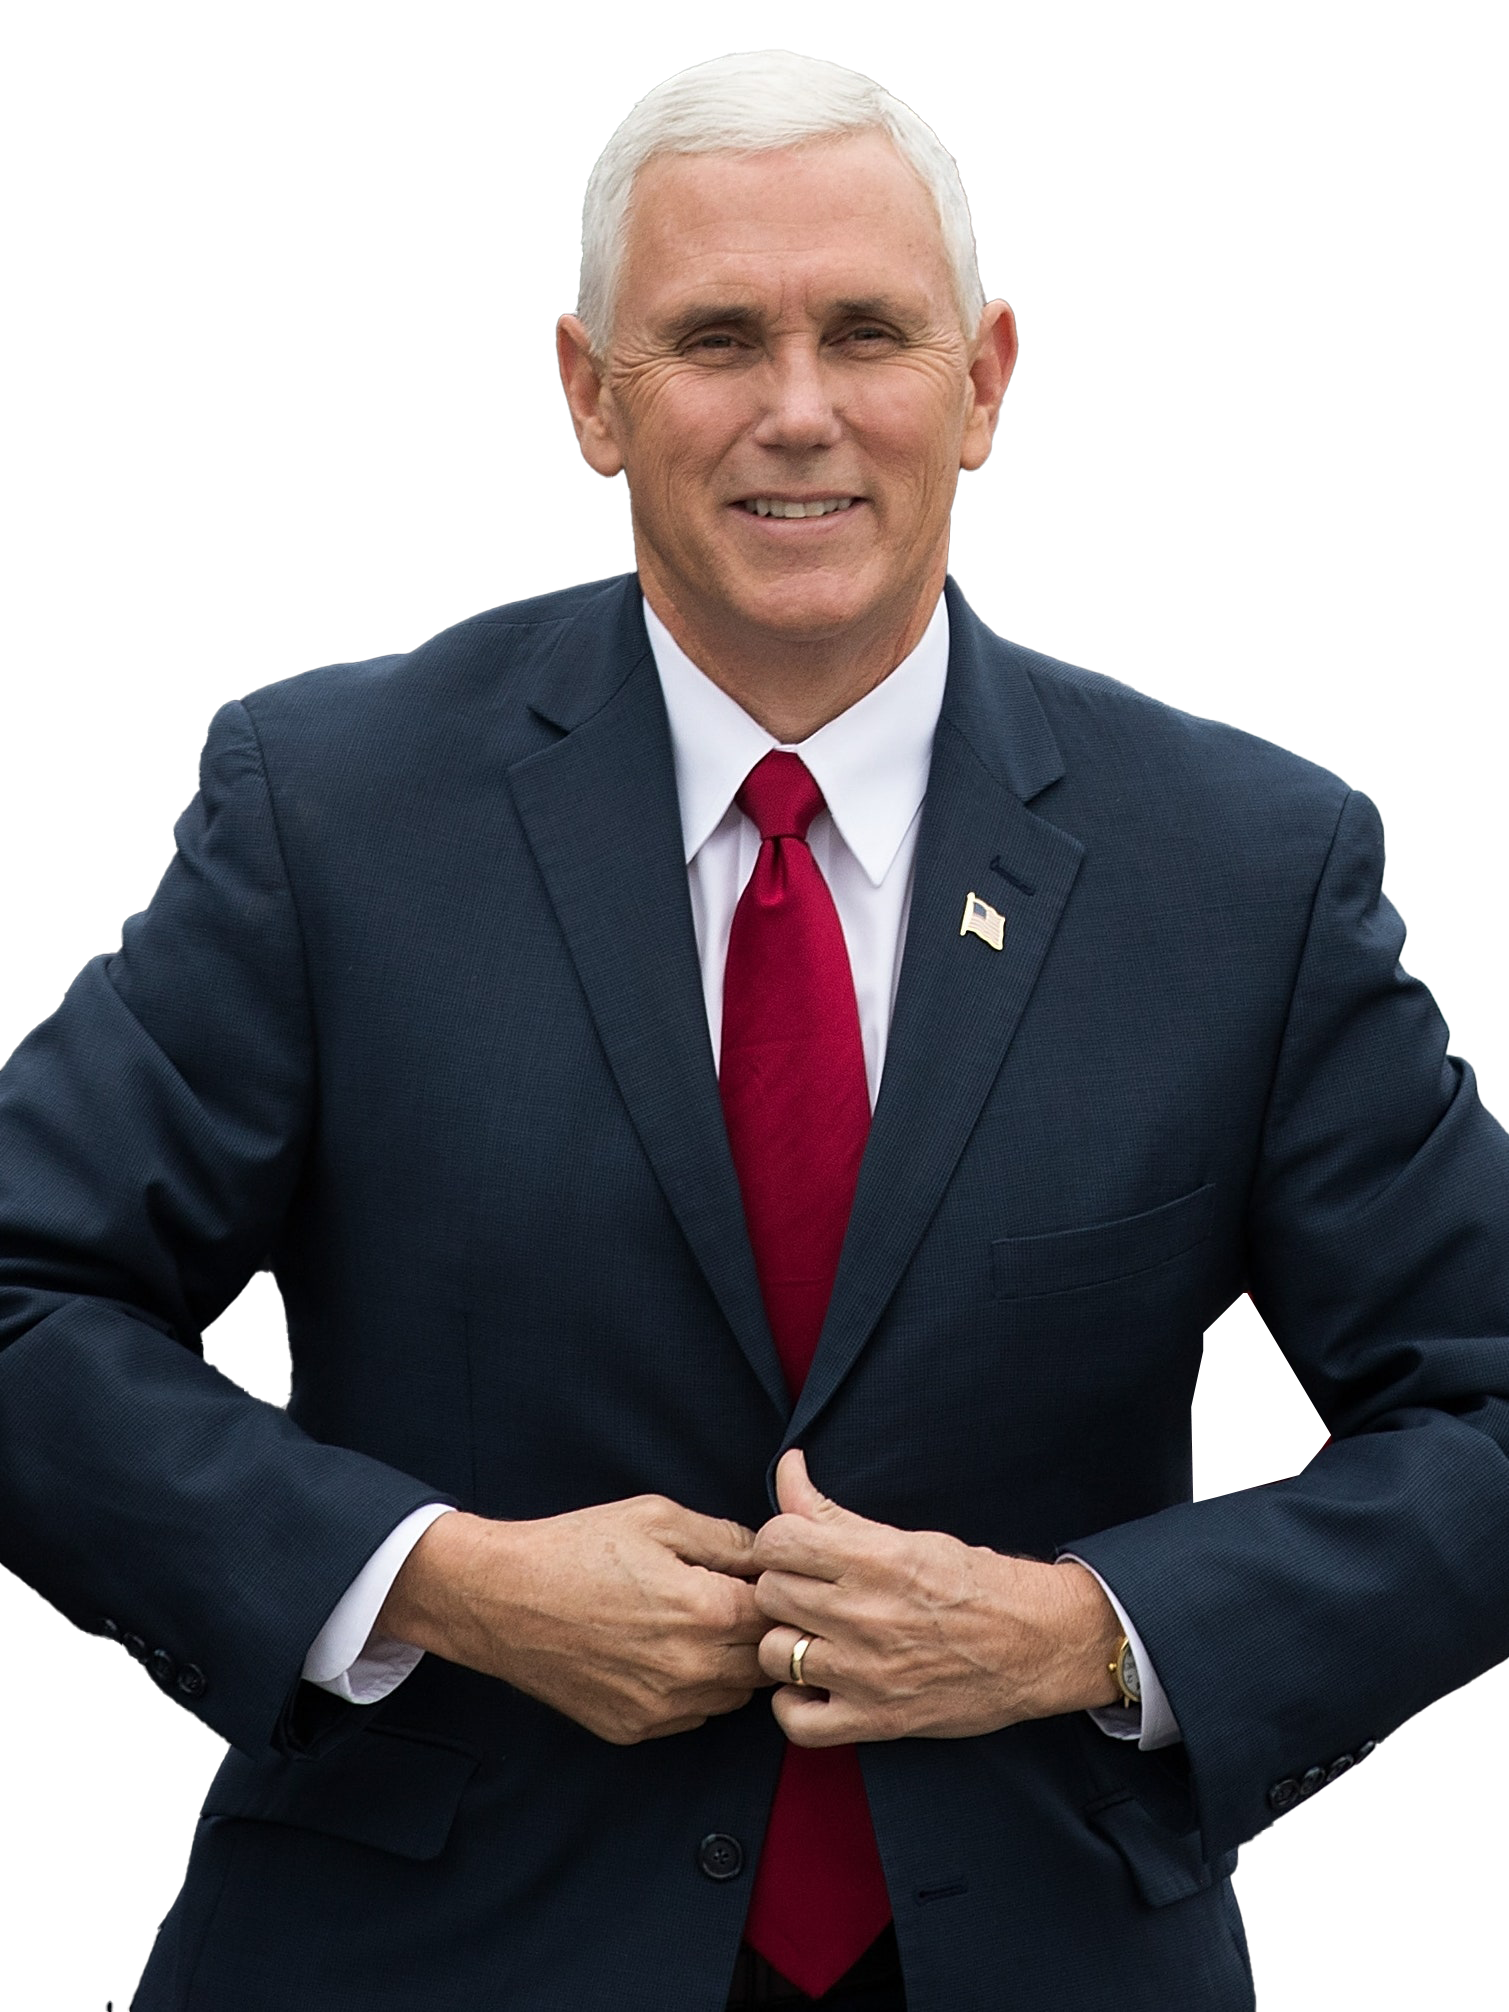 Mike Pence Images Transparentes